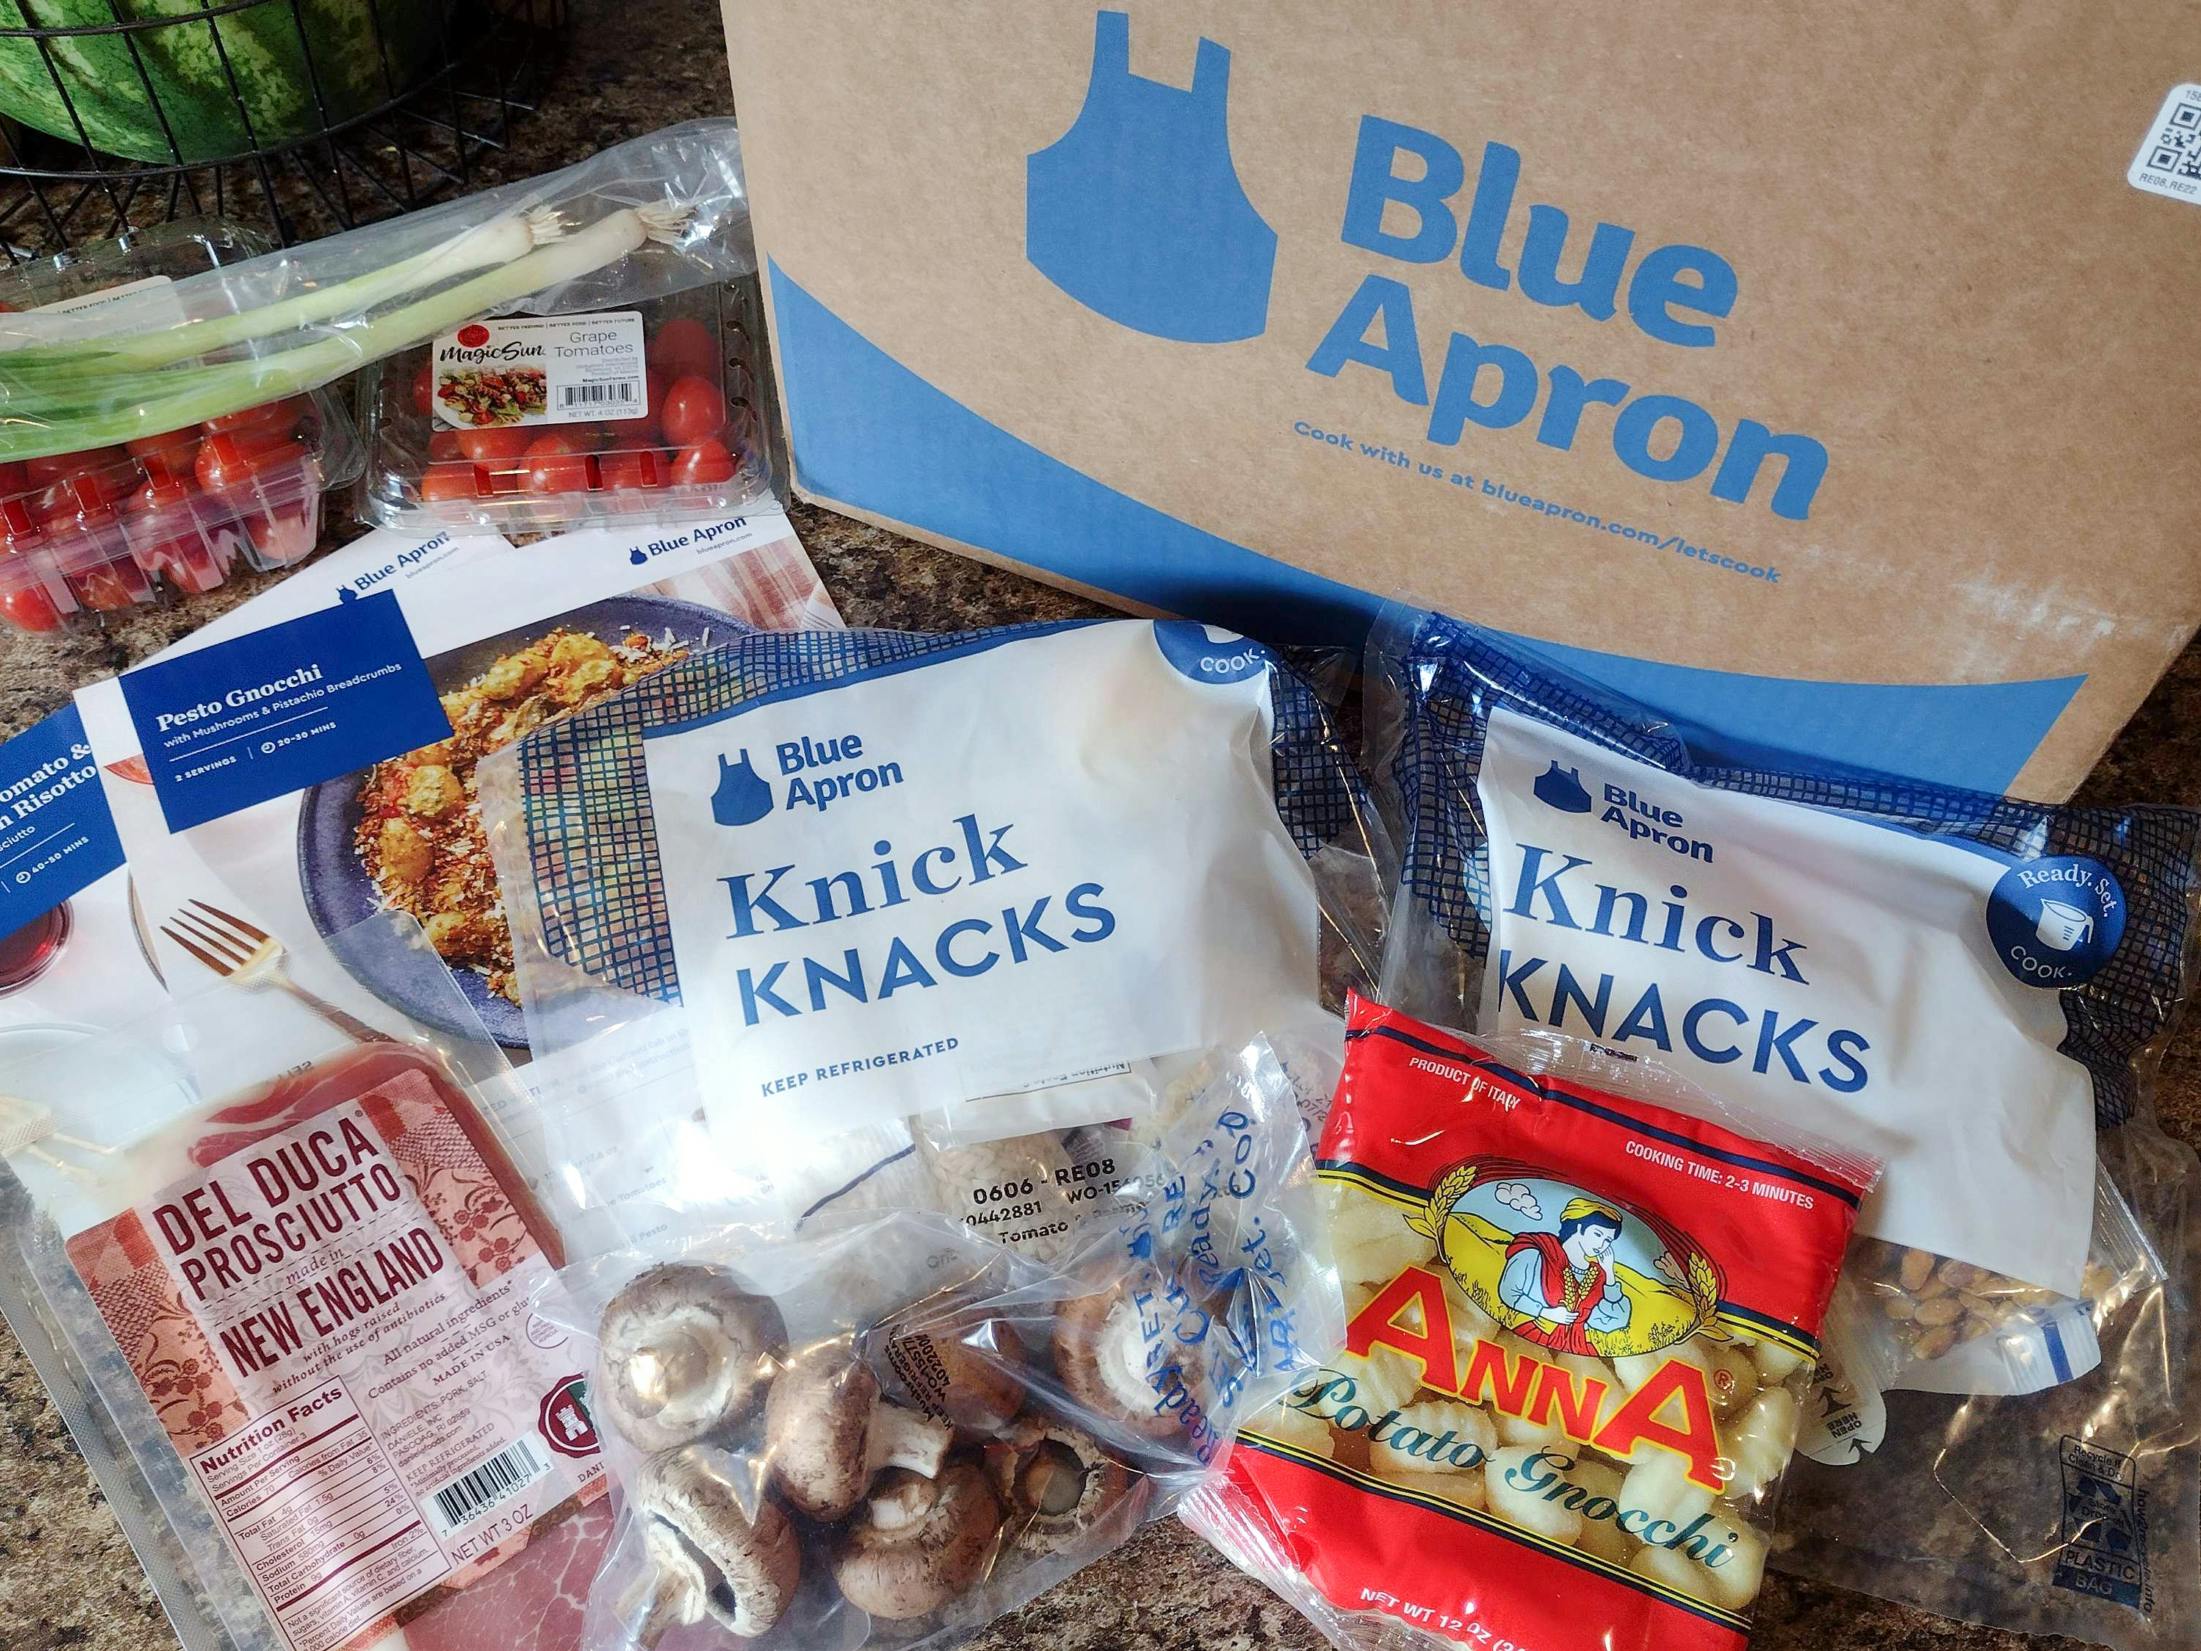 A Blue Apron box and its contents on a counter